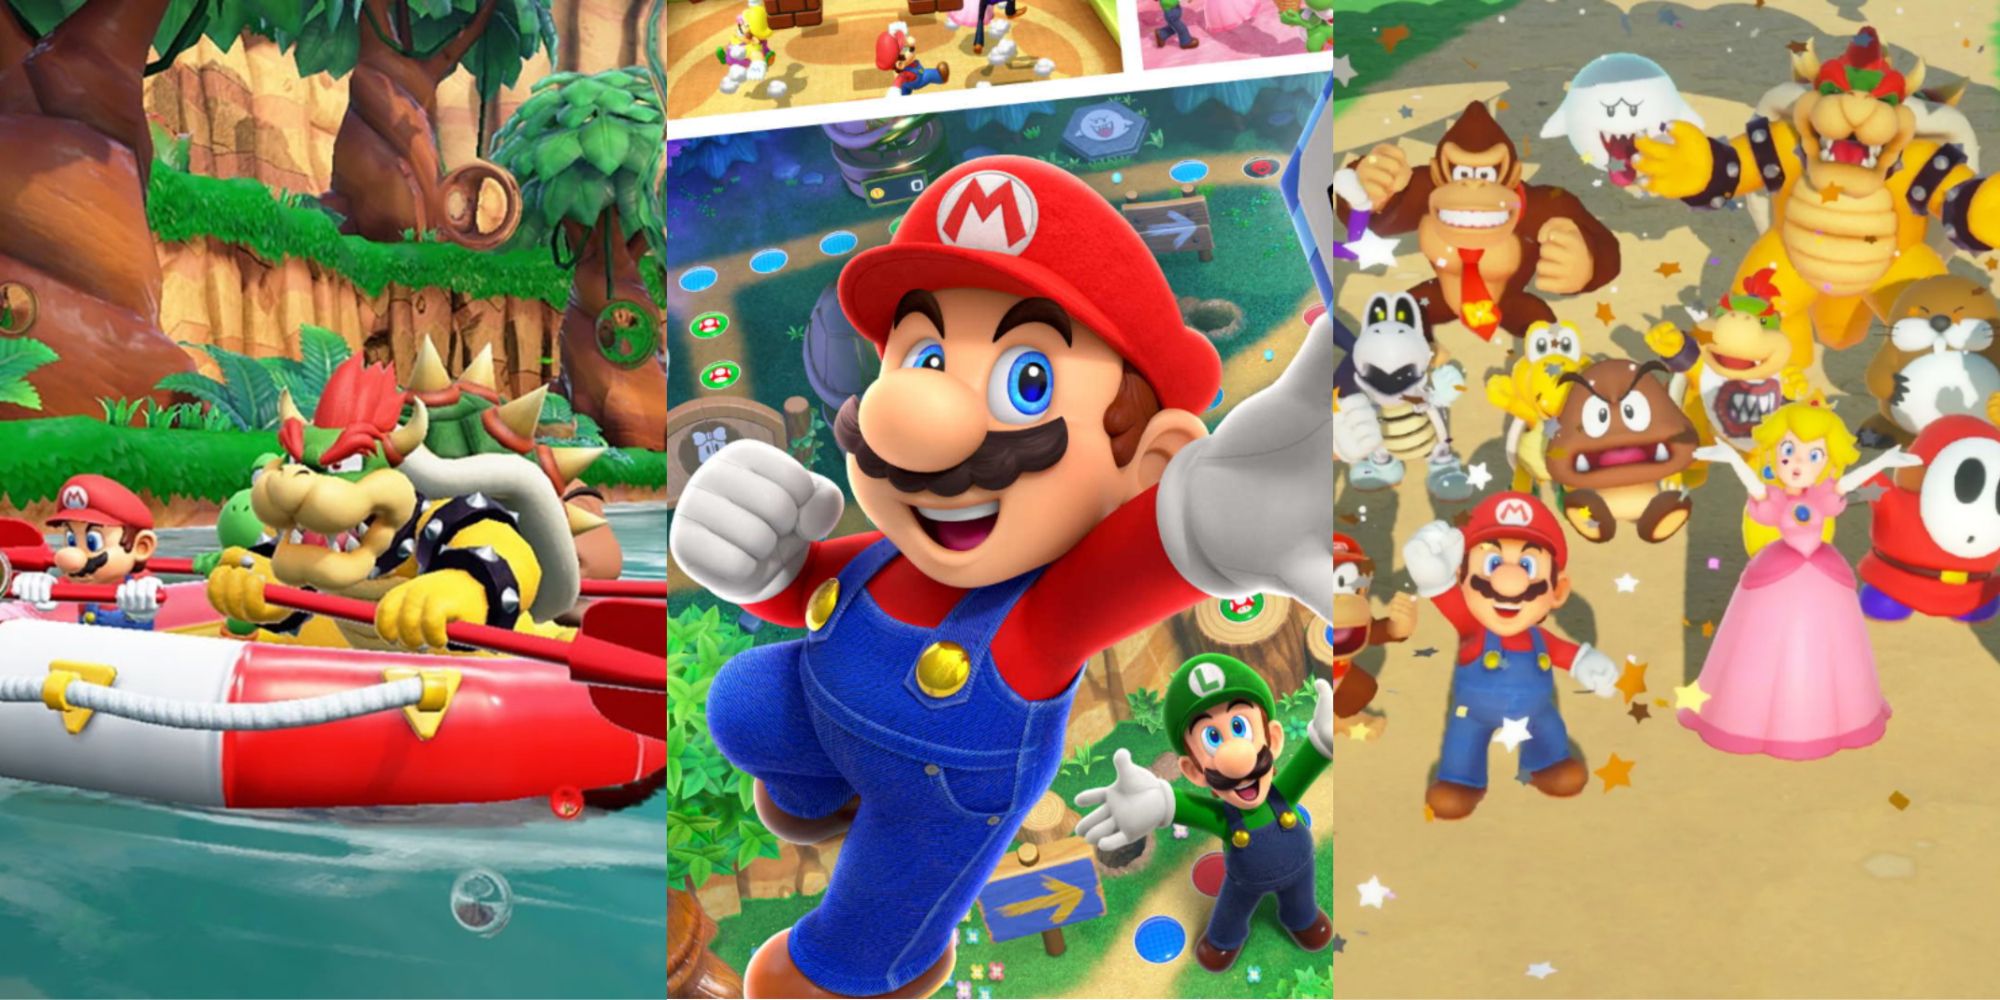 Our Review Of Super Mario Party For The Nintendo Switch - The Game of Nerds